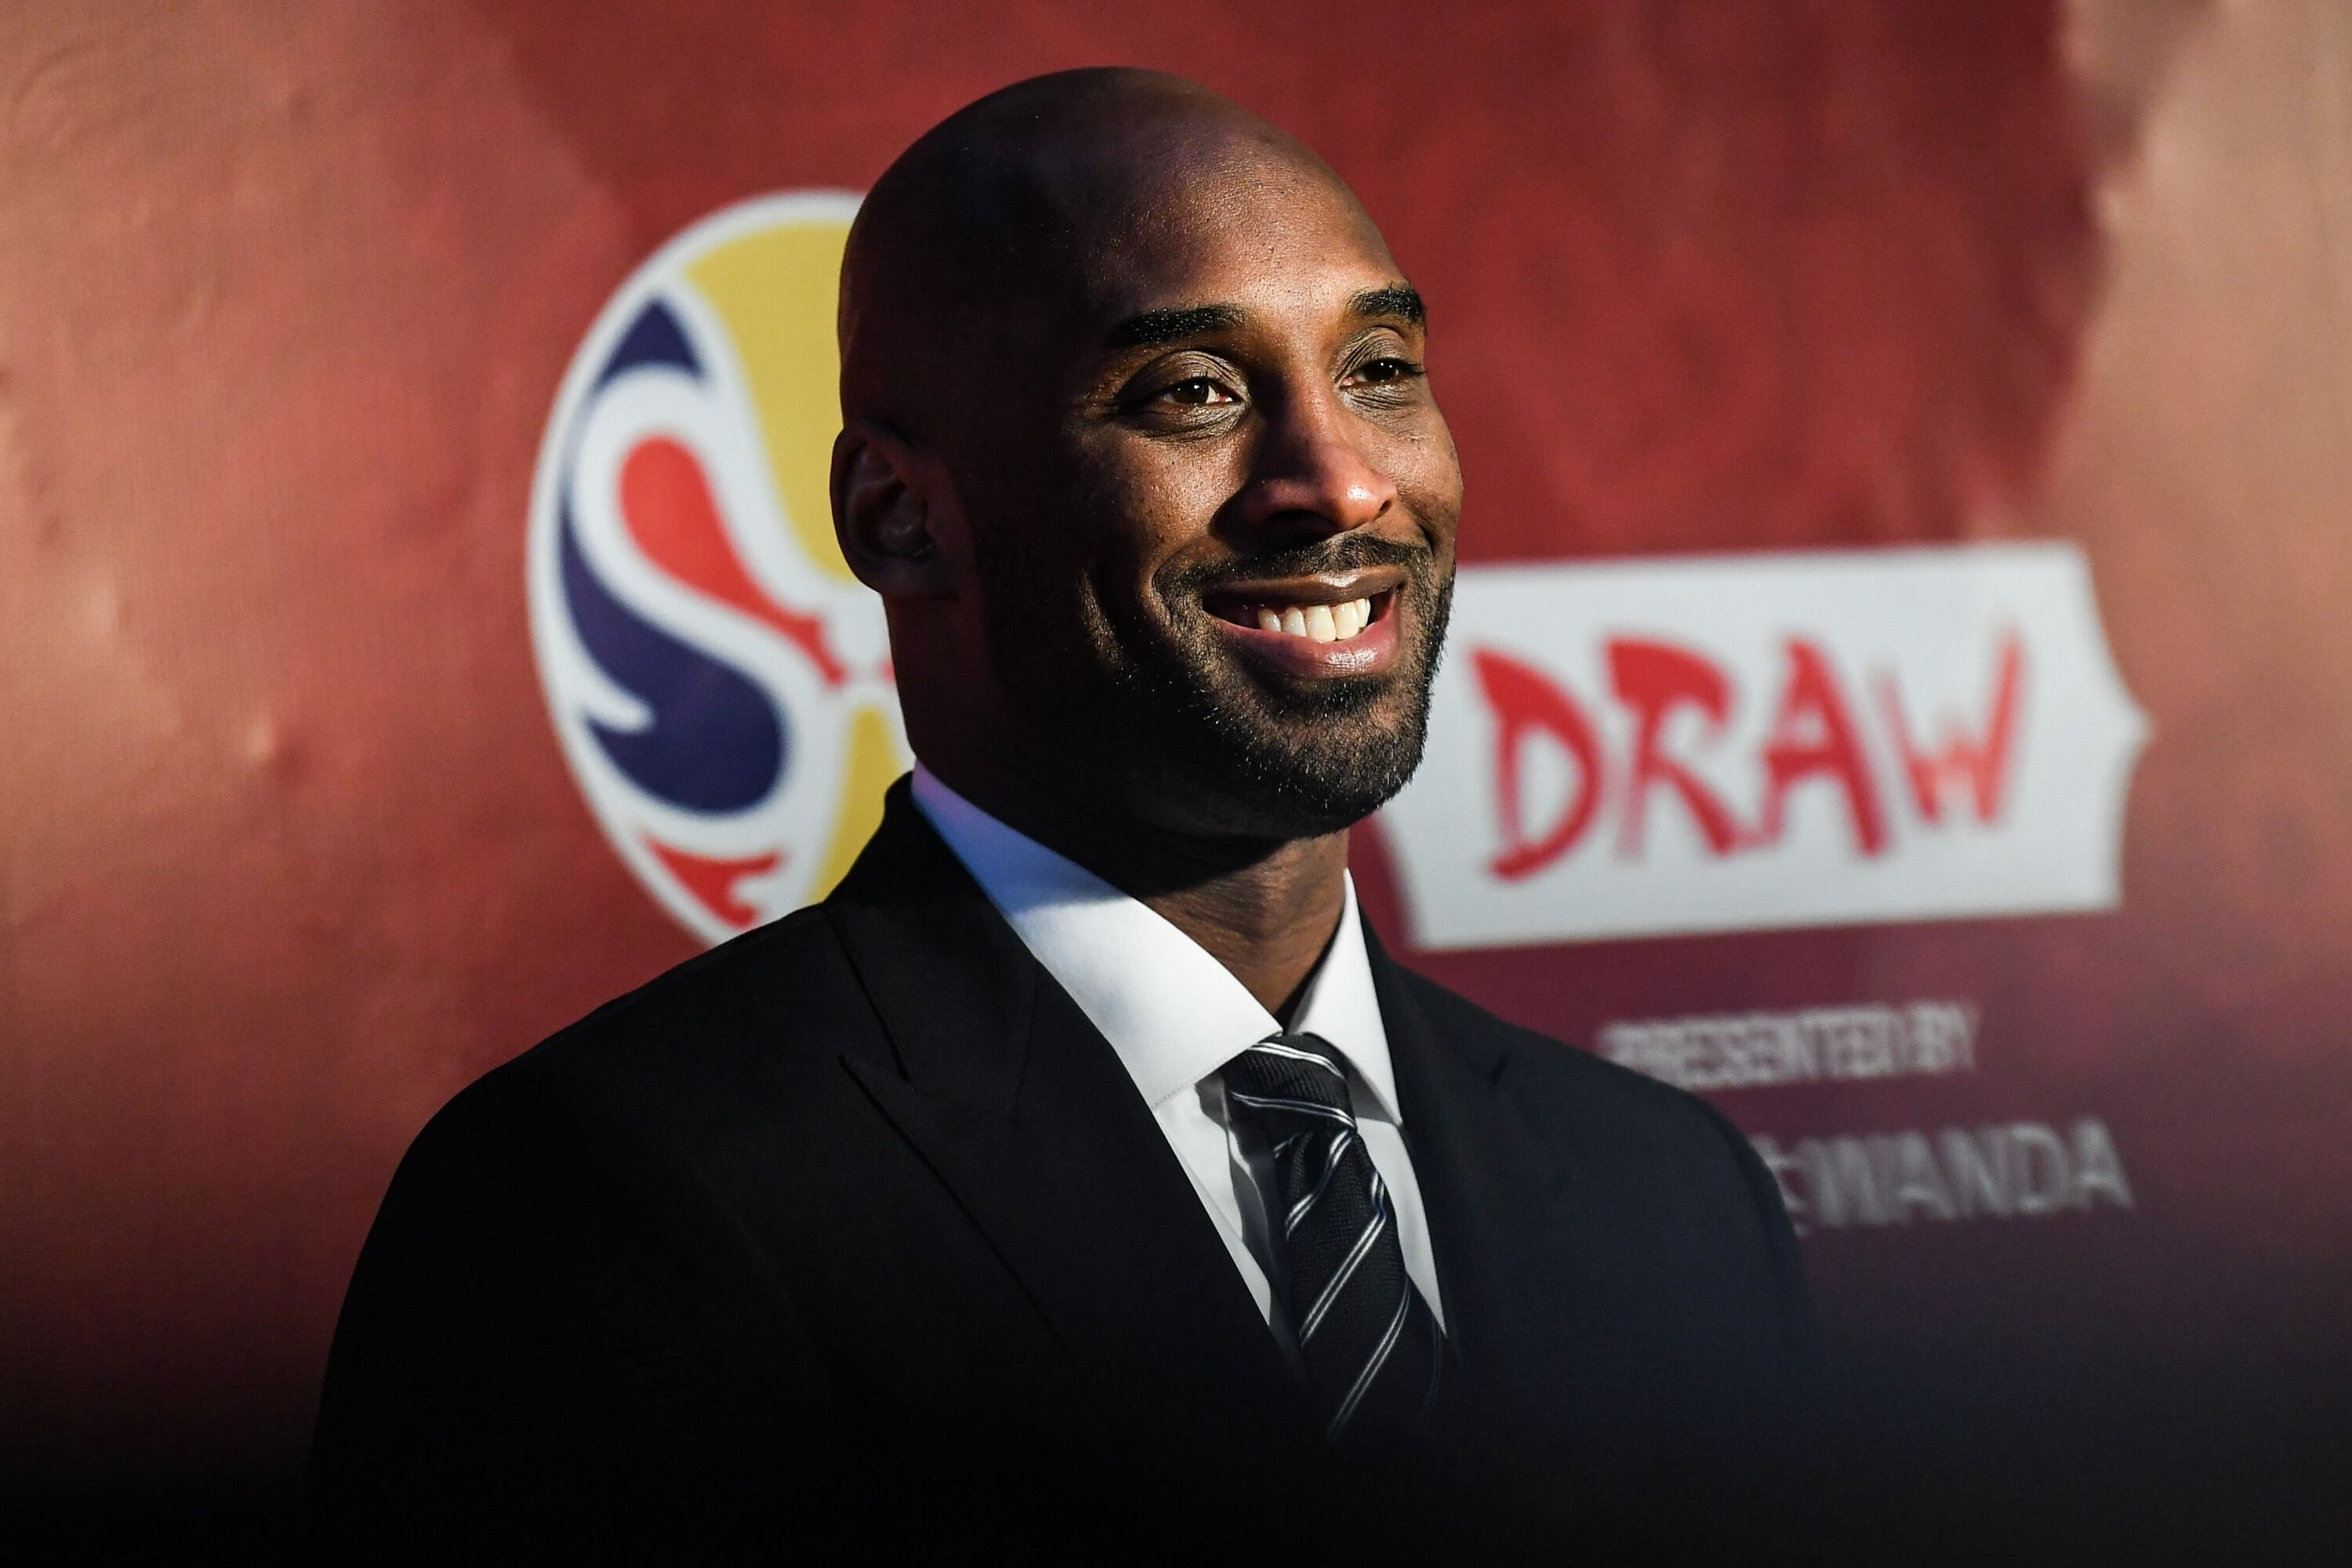 Kobe Bryant at the draw ceremony for the 2019 FIBA Basketball World Cup in Chine/ Source: Getty Images